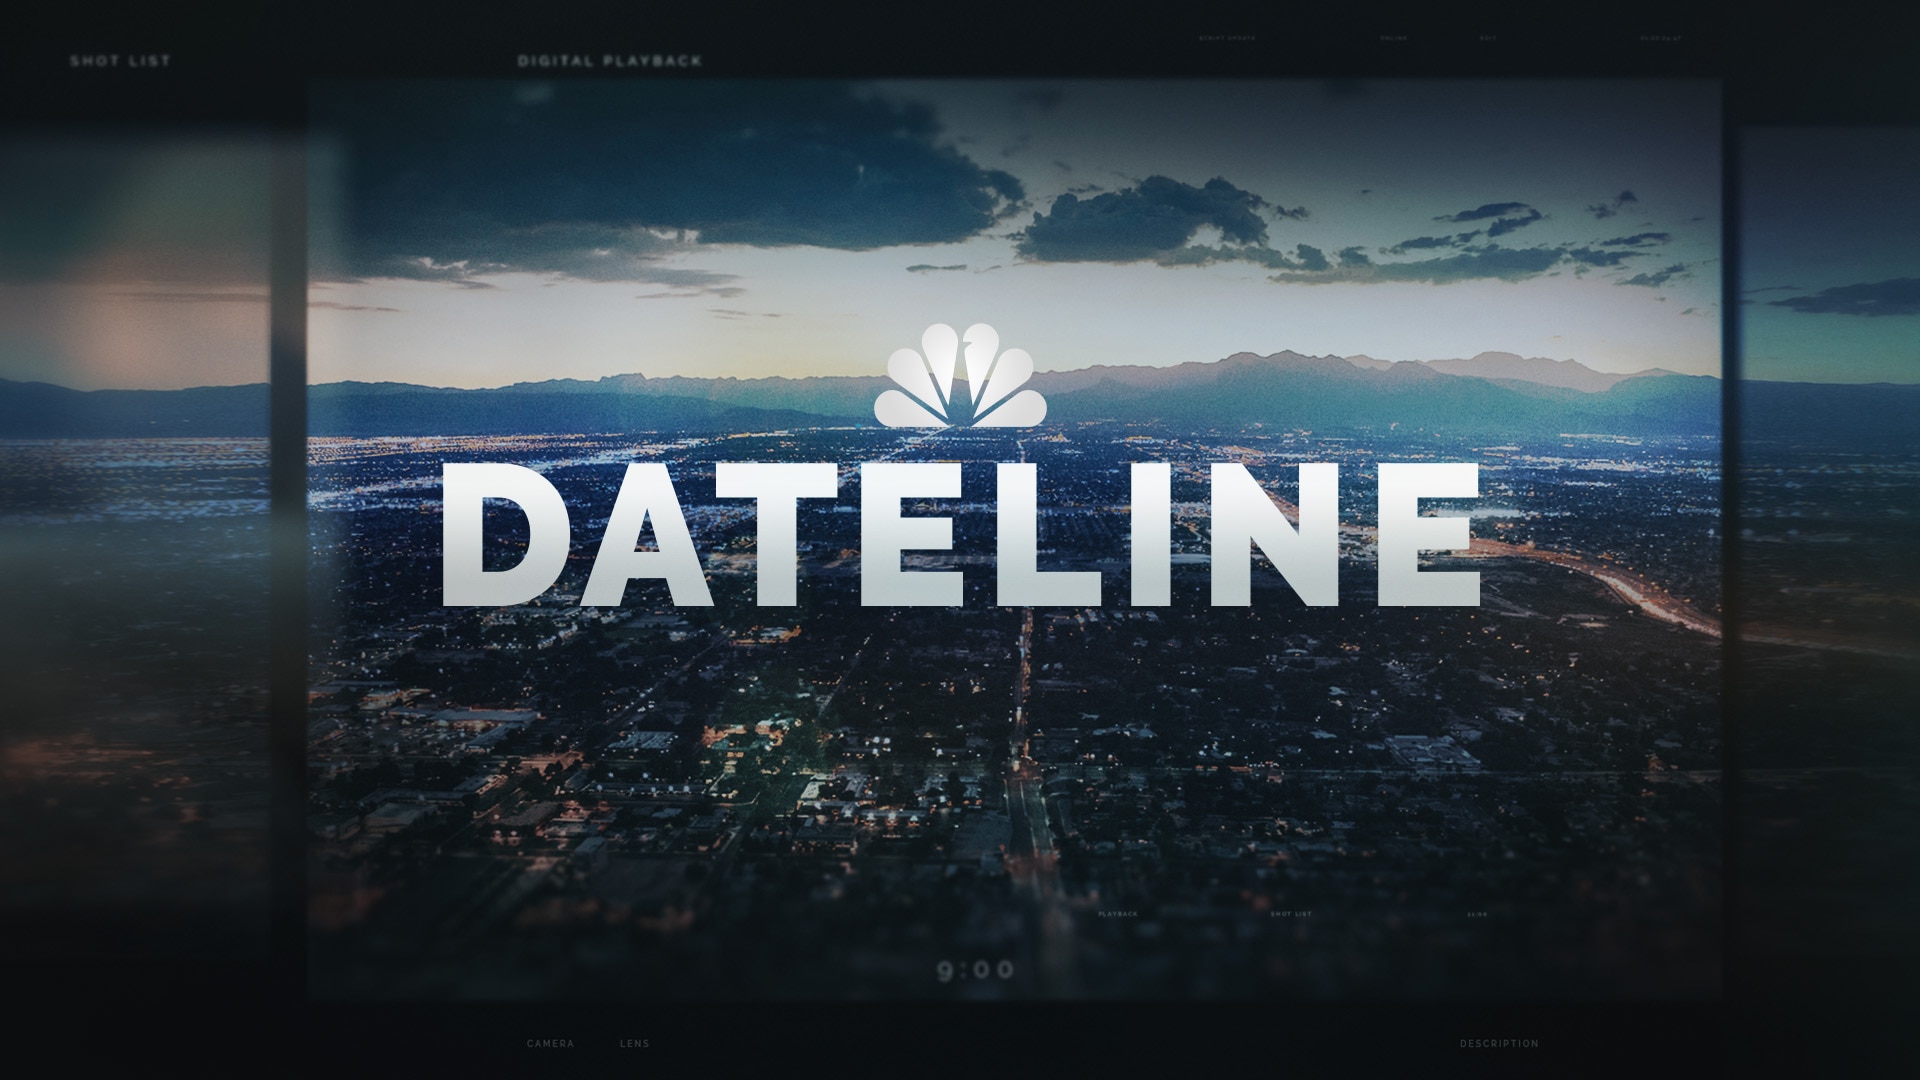 When is Dateline on Television?